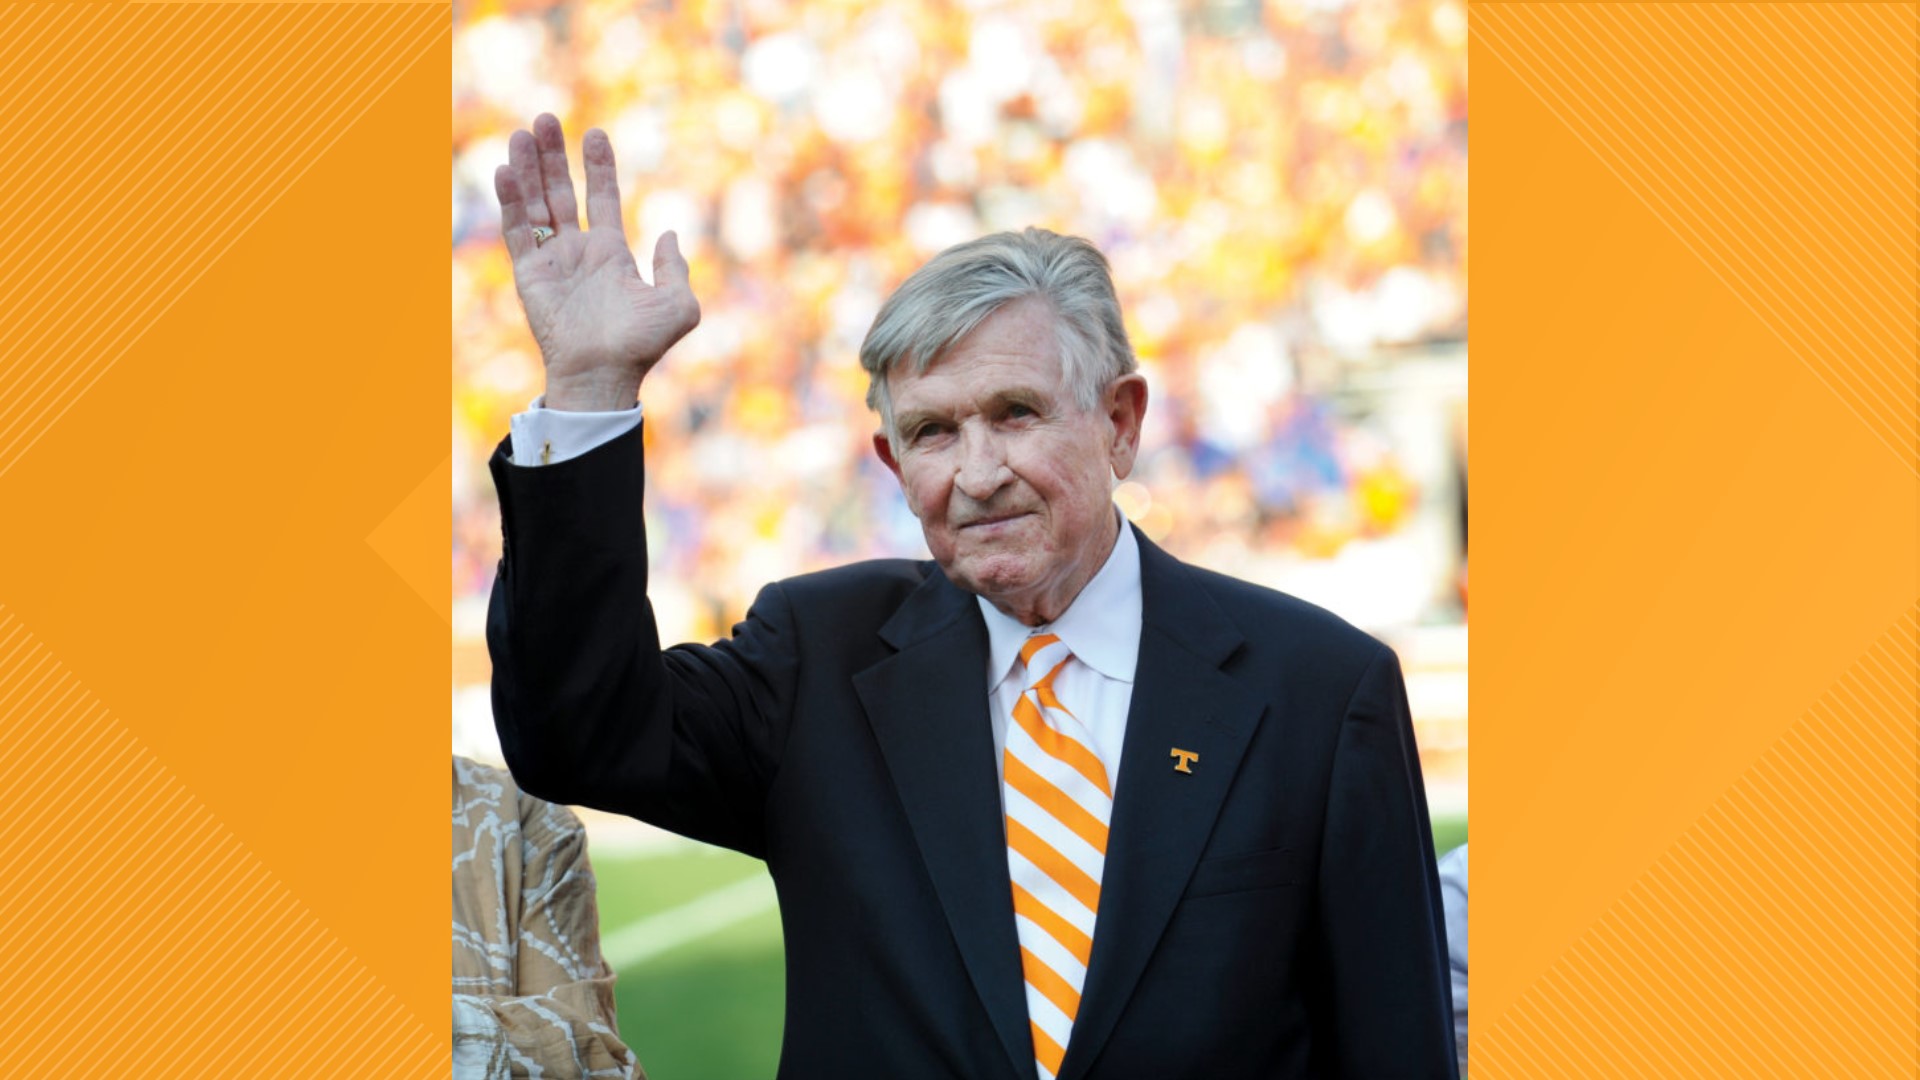 Johnny Majors was one of UT's most iconic players and coaches. He passed away at 85.